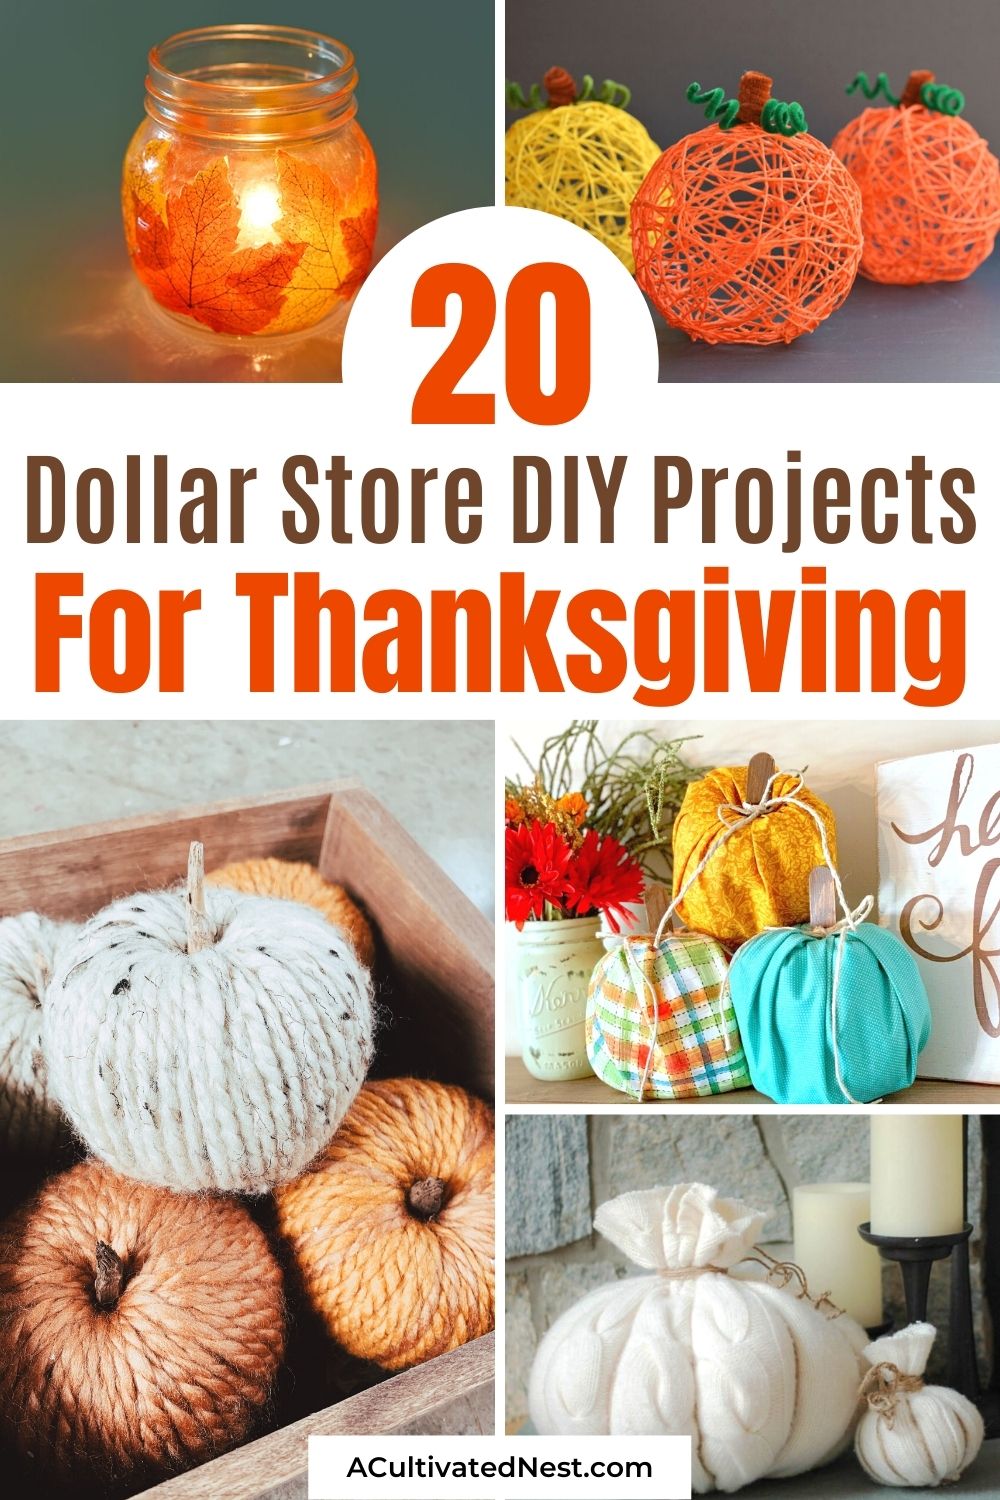 20 Dollar Store Thanksgiving DIY Projects- You can make your home look lovely for Thanksgiving on a budget with decorations from this list of dollar store Thanksgiving DIY projects! | #crafts #DIYs #ThanksgivingCrafts #dollarStoreDIY #ACultivatedNest